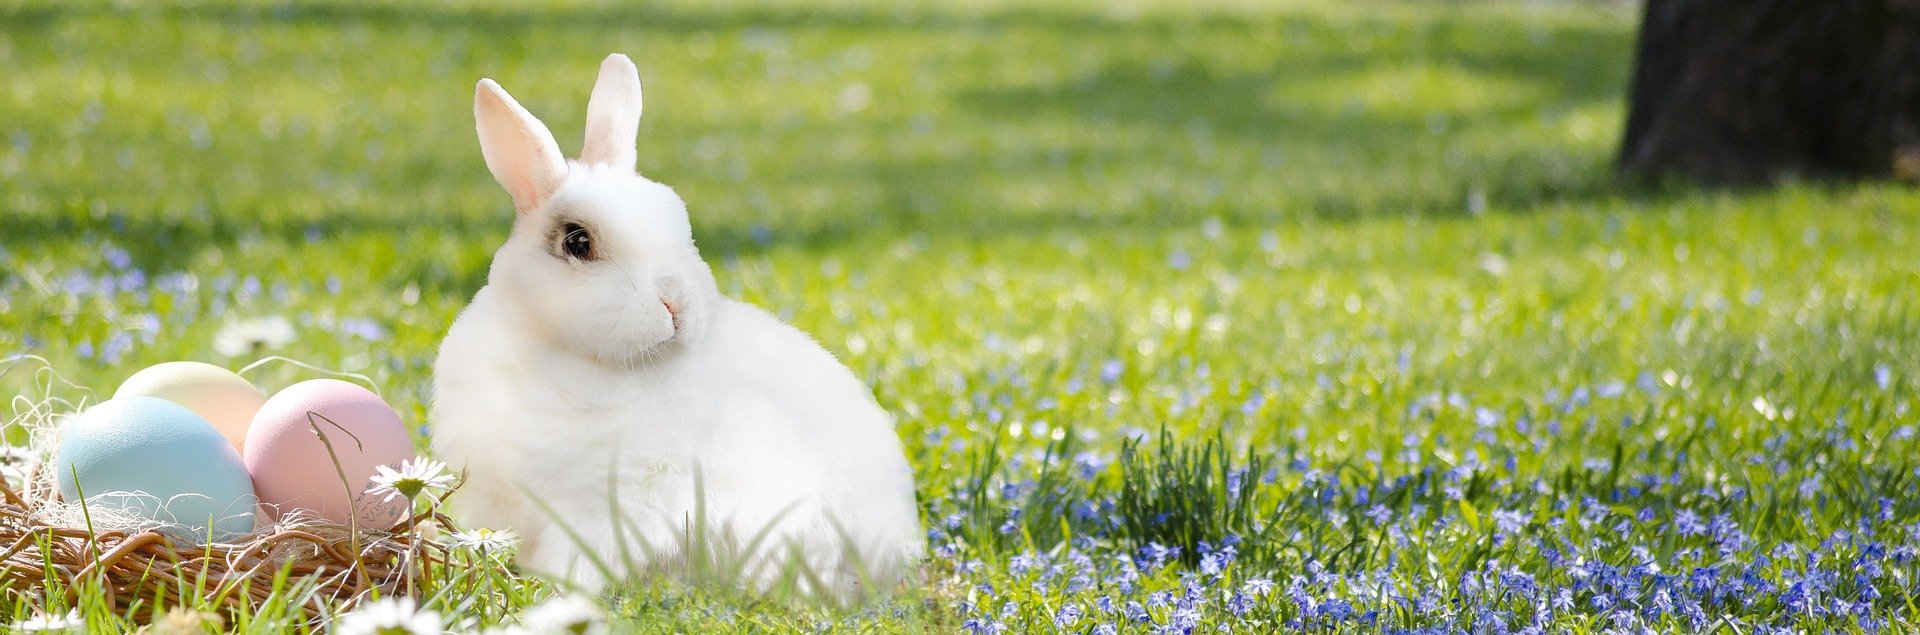 A white bunny in a grassy field with Easter eggs and forget-me-nots